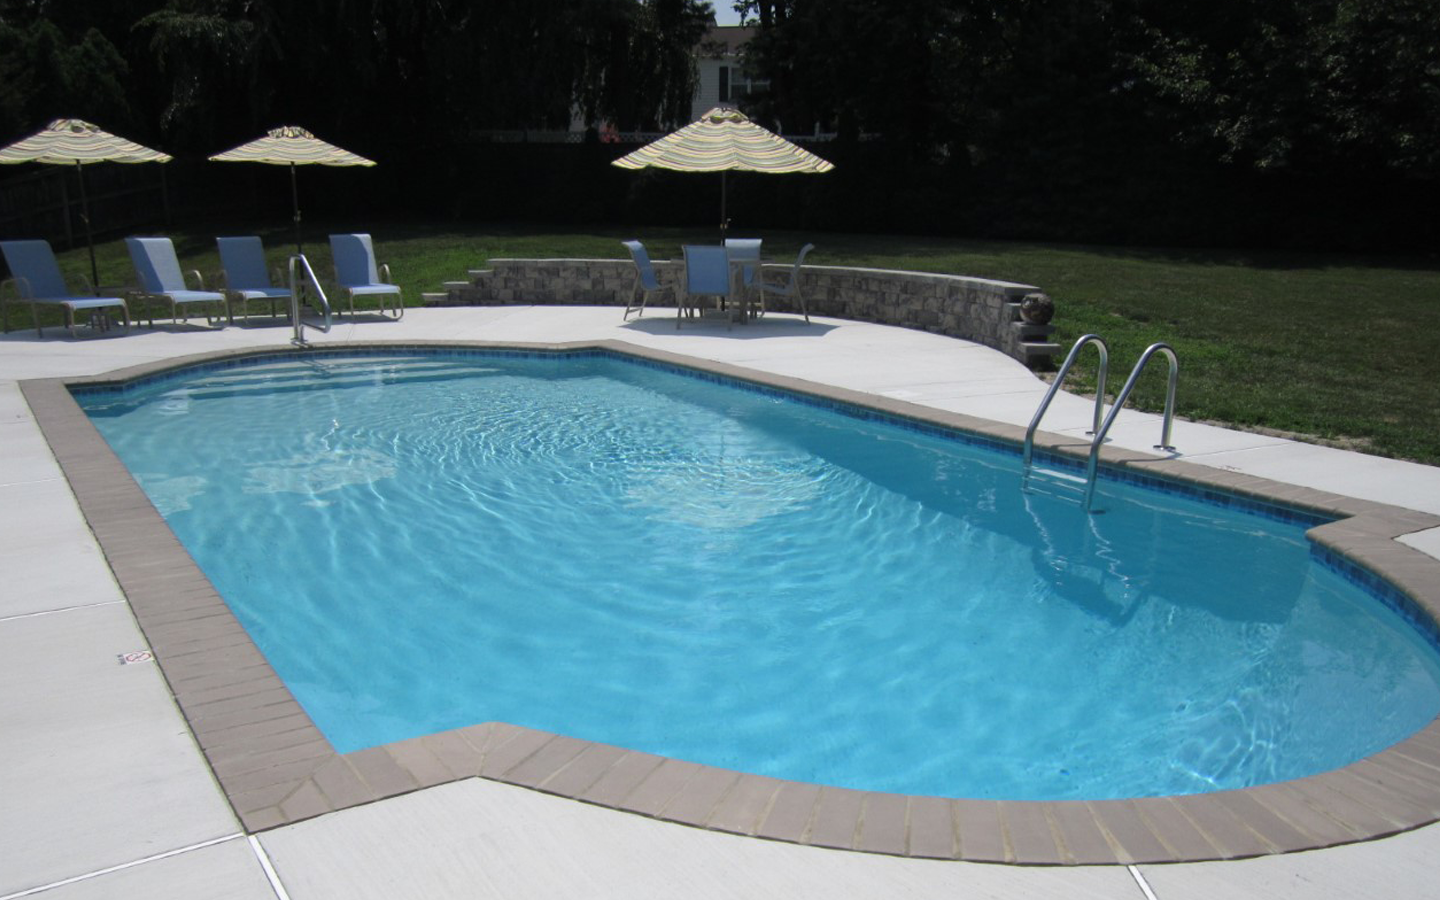  The pool is much better than new! The patio area is more suited for family entertainment, the dual main drain eliminated a serious safety issue, and the updated selections increase the value. Happy Client. 